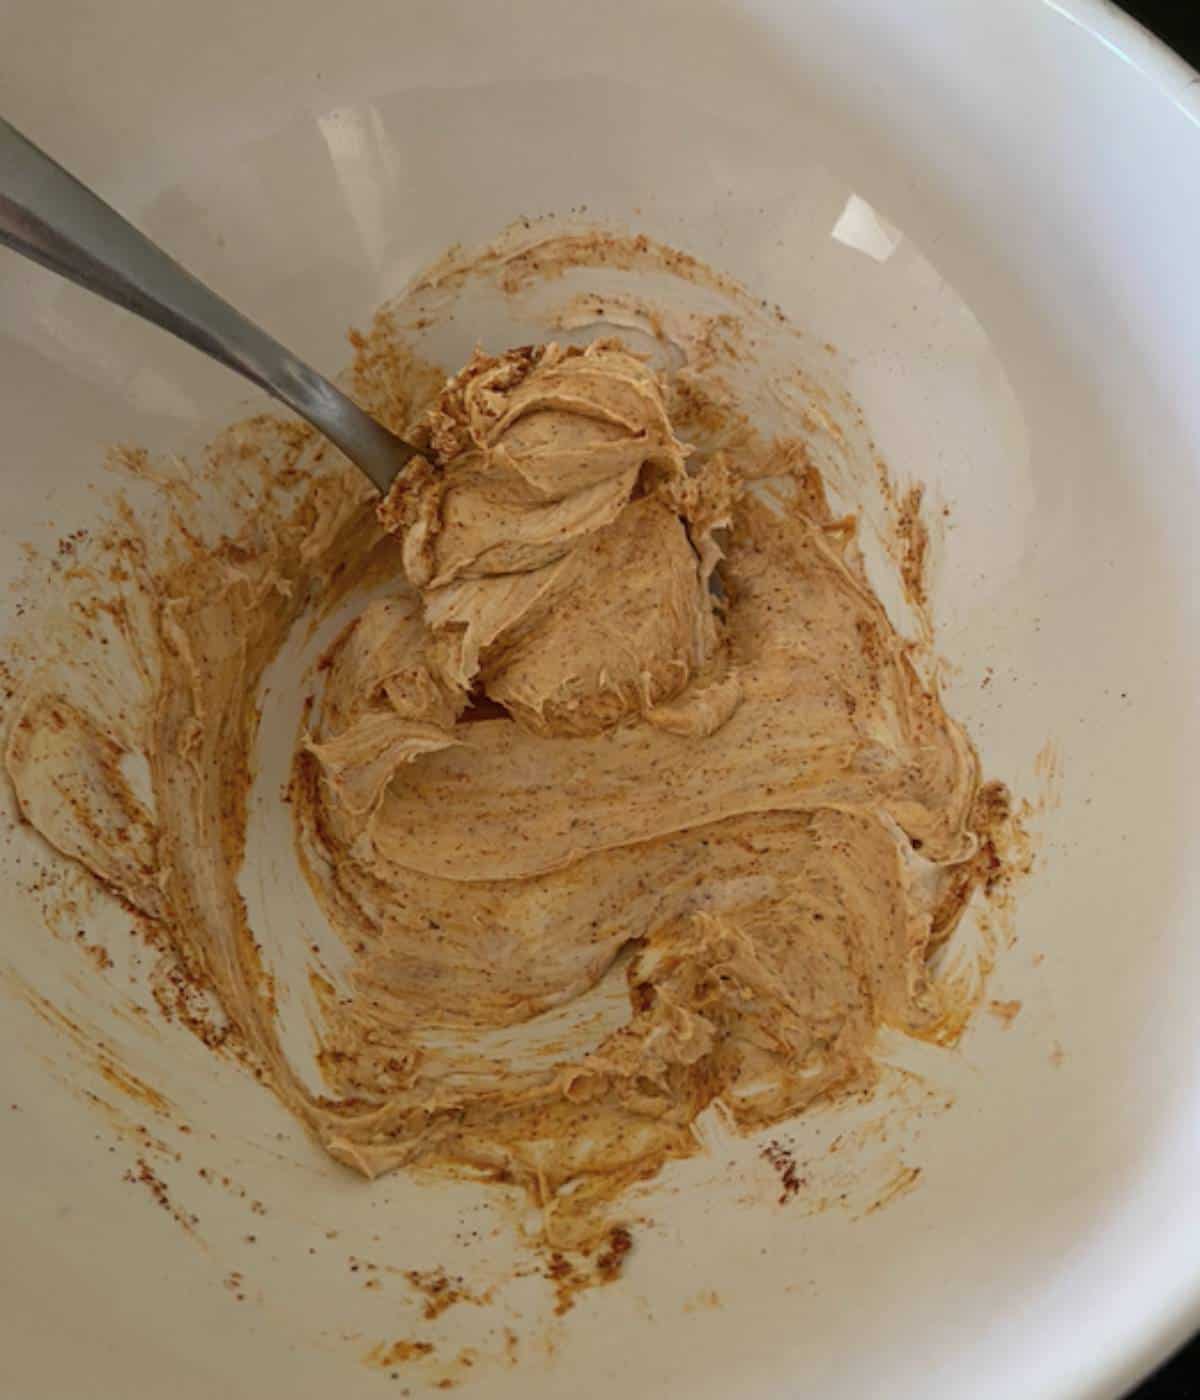 Cream cheese spread with spices.